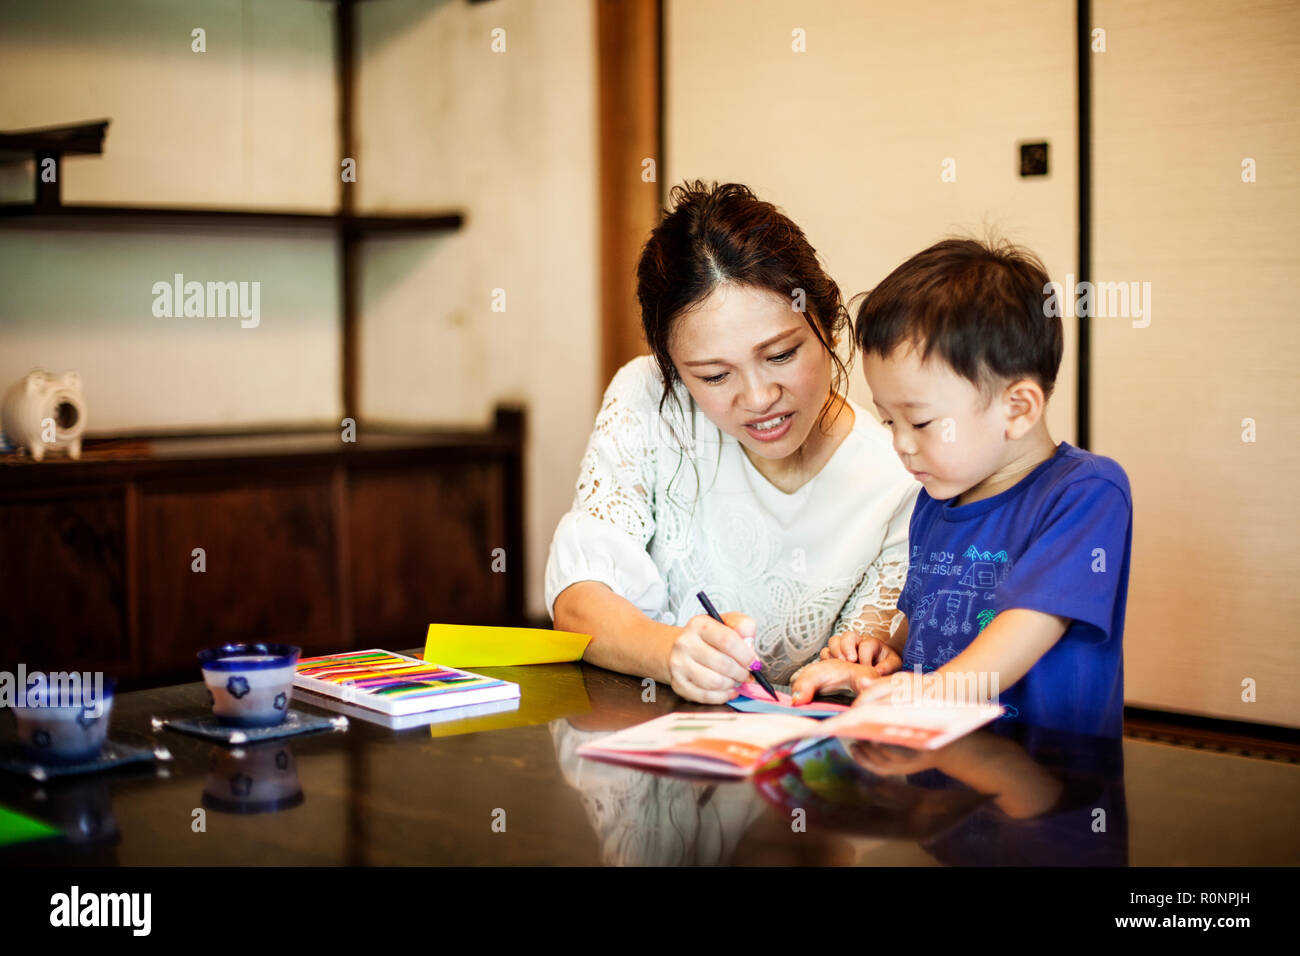 Japanese woman and little boy sitting at a table, drawing with colouring pens. Stock Photo